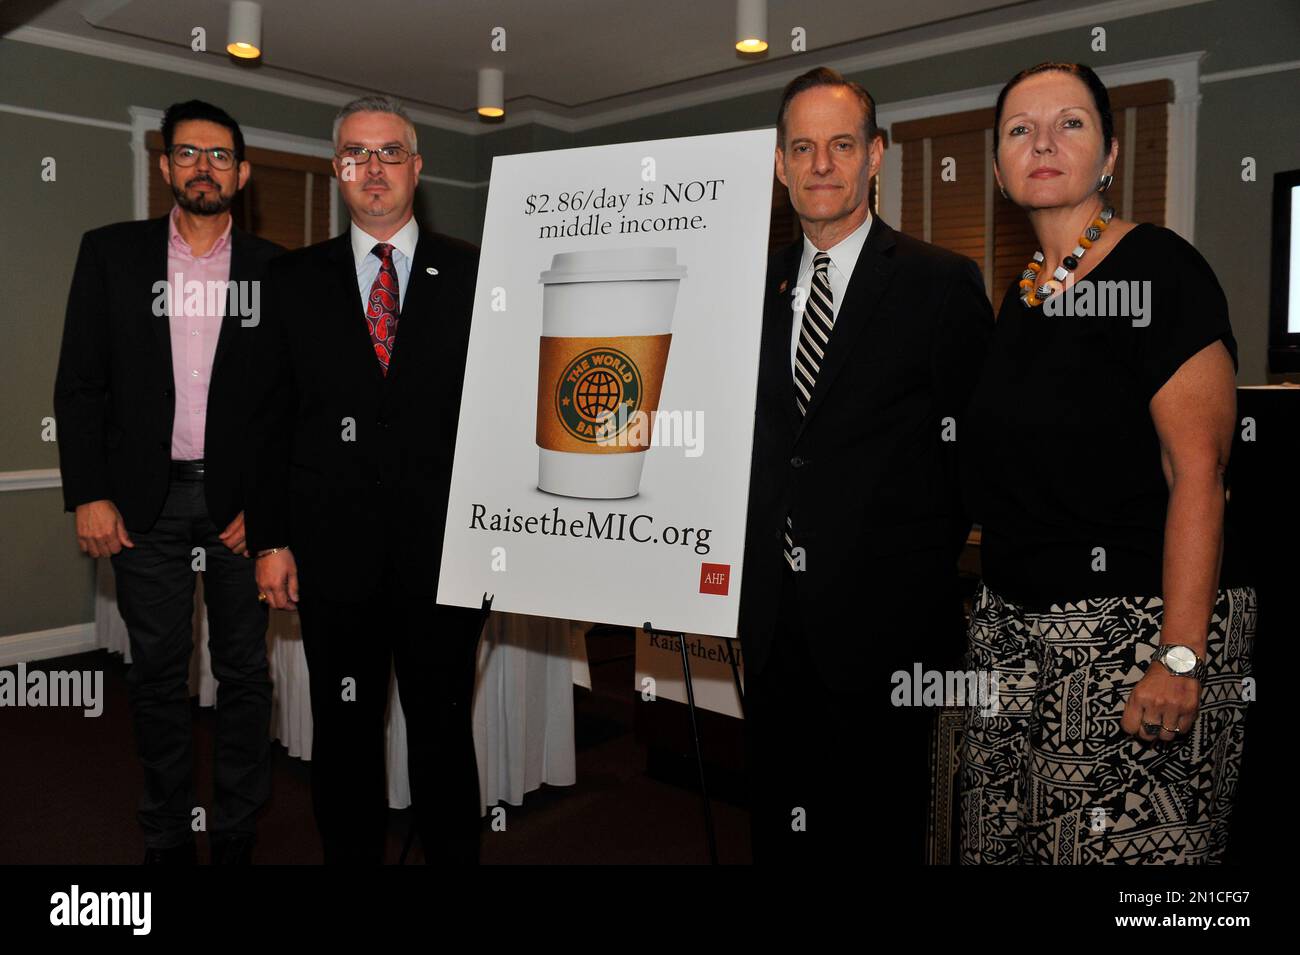 https://c8.alamy.com/comp/2N1CFG7/image-distributed-for-aids-healthcare-foundation-l-r-jorge-saavedra-global-ambassador-for-ahf-and-former-director-of-mexicos-national-aids-program-jos-zuniga-presidentceo-international-association-of-providers-of-aids-care-michael-weinstein-president-of-the-aids-healthcare-foundation-and-terri-ford-chief-of-global-policy-advocacy-for-ahf-are-seen-at-the-world-bank-raise-the-mic-press-conference-on-monday-sept-21-in-washington-dc-larry-frenchap-images-for-aids-healthcare-foundation-2N1CFG7.jpg